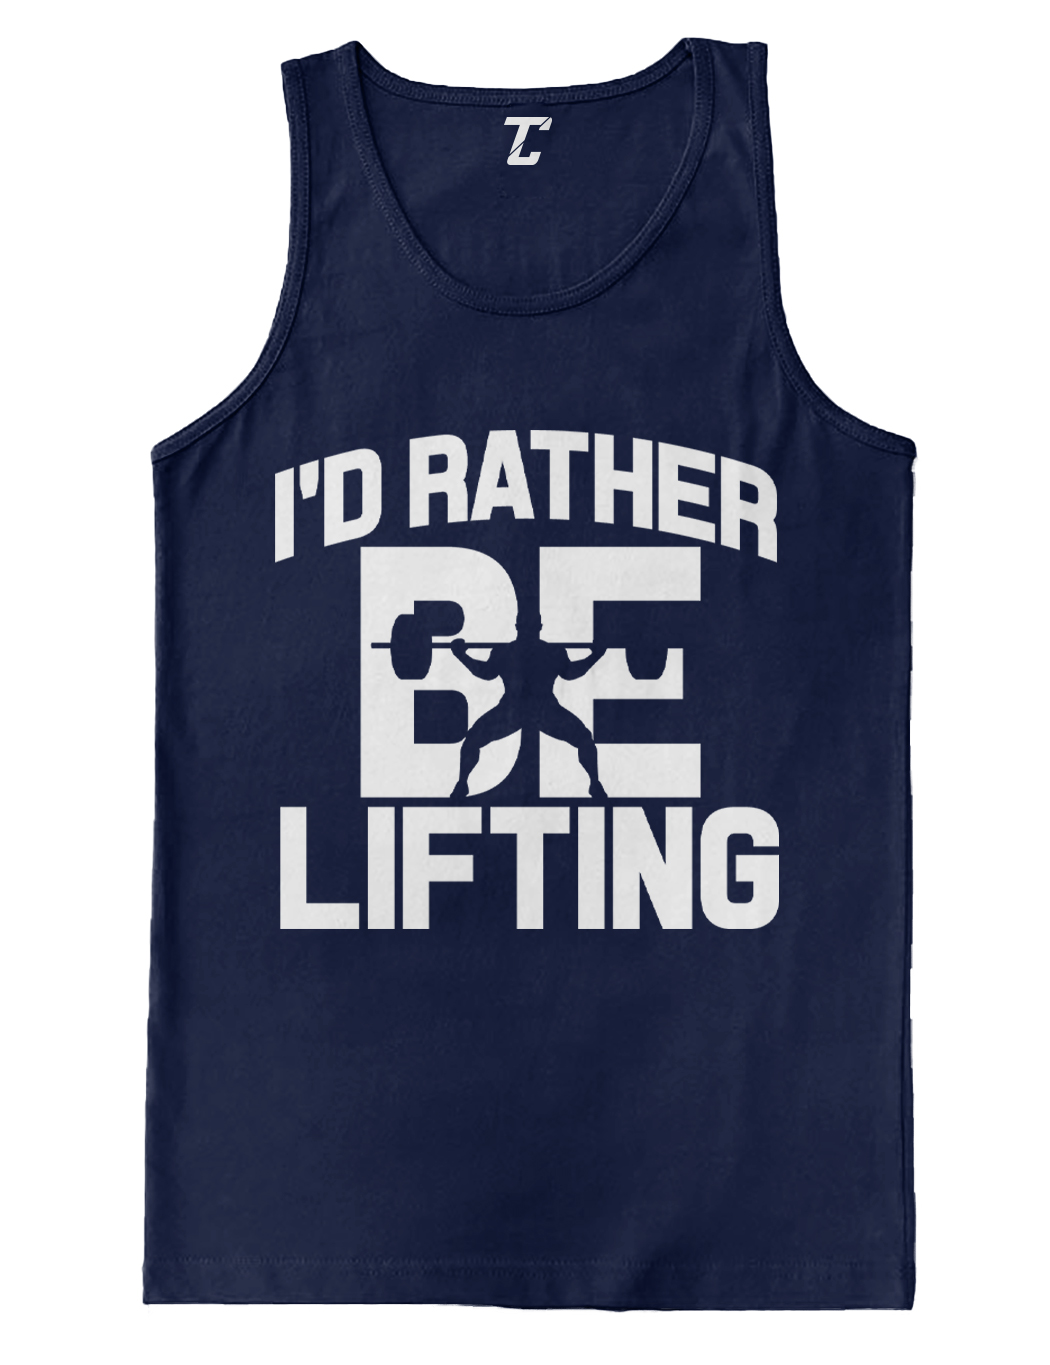 I'd Rather Be Lifting Gym Workout Fitness Men's Tank Top